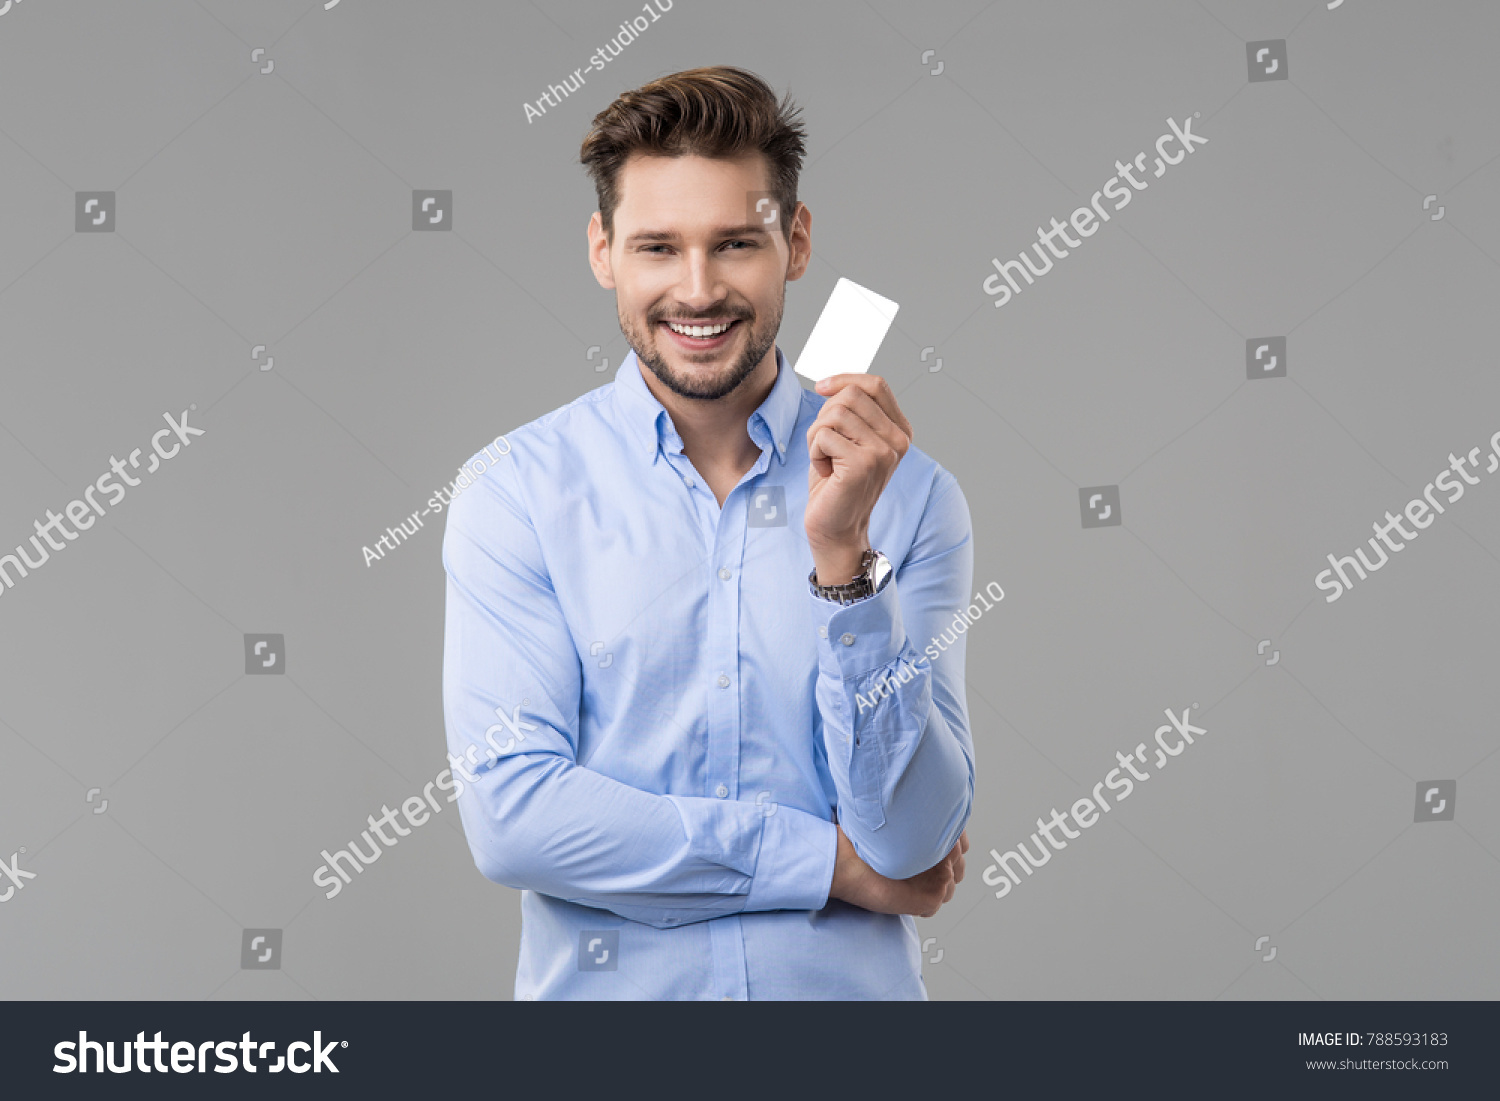 Handsome man in blue shirt  with white card #788593183